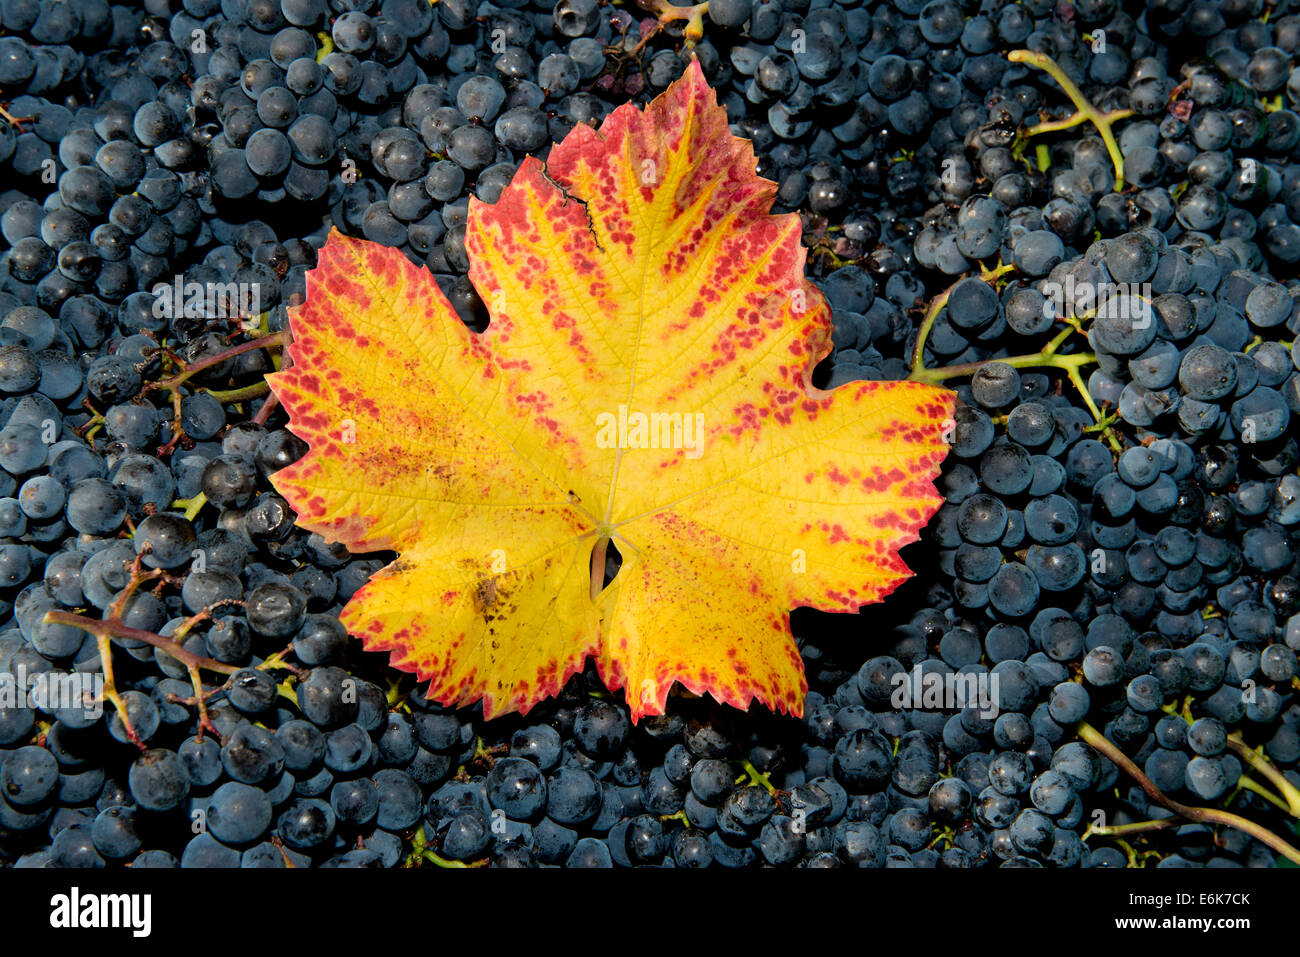 Vine leaf with autumn colours on grapes, Baden-Württemberg, Germany Stock Photo